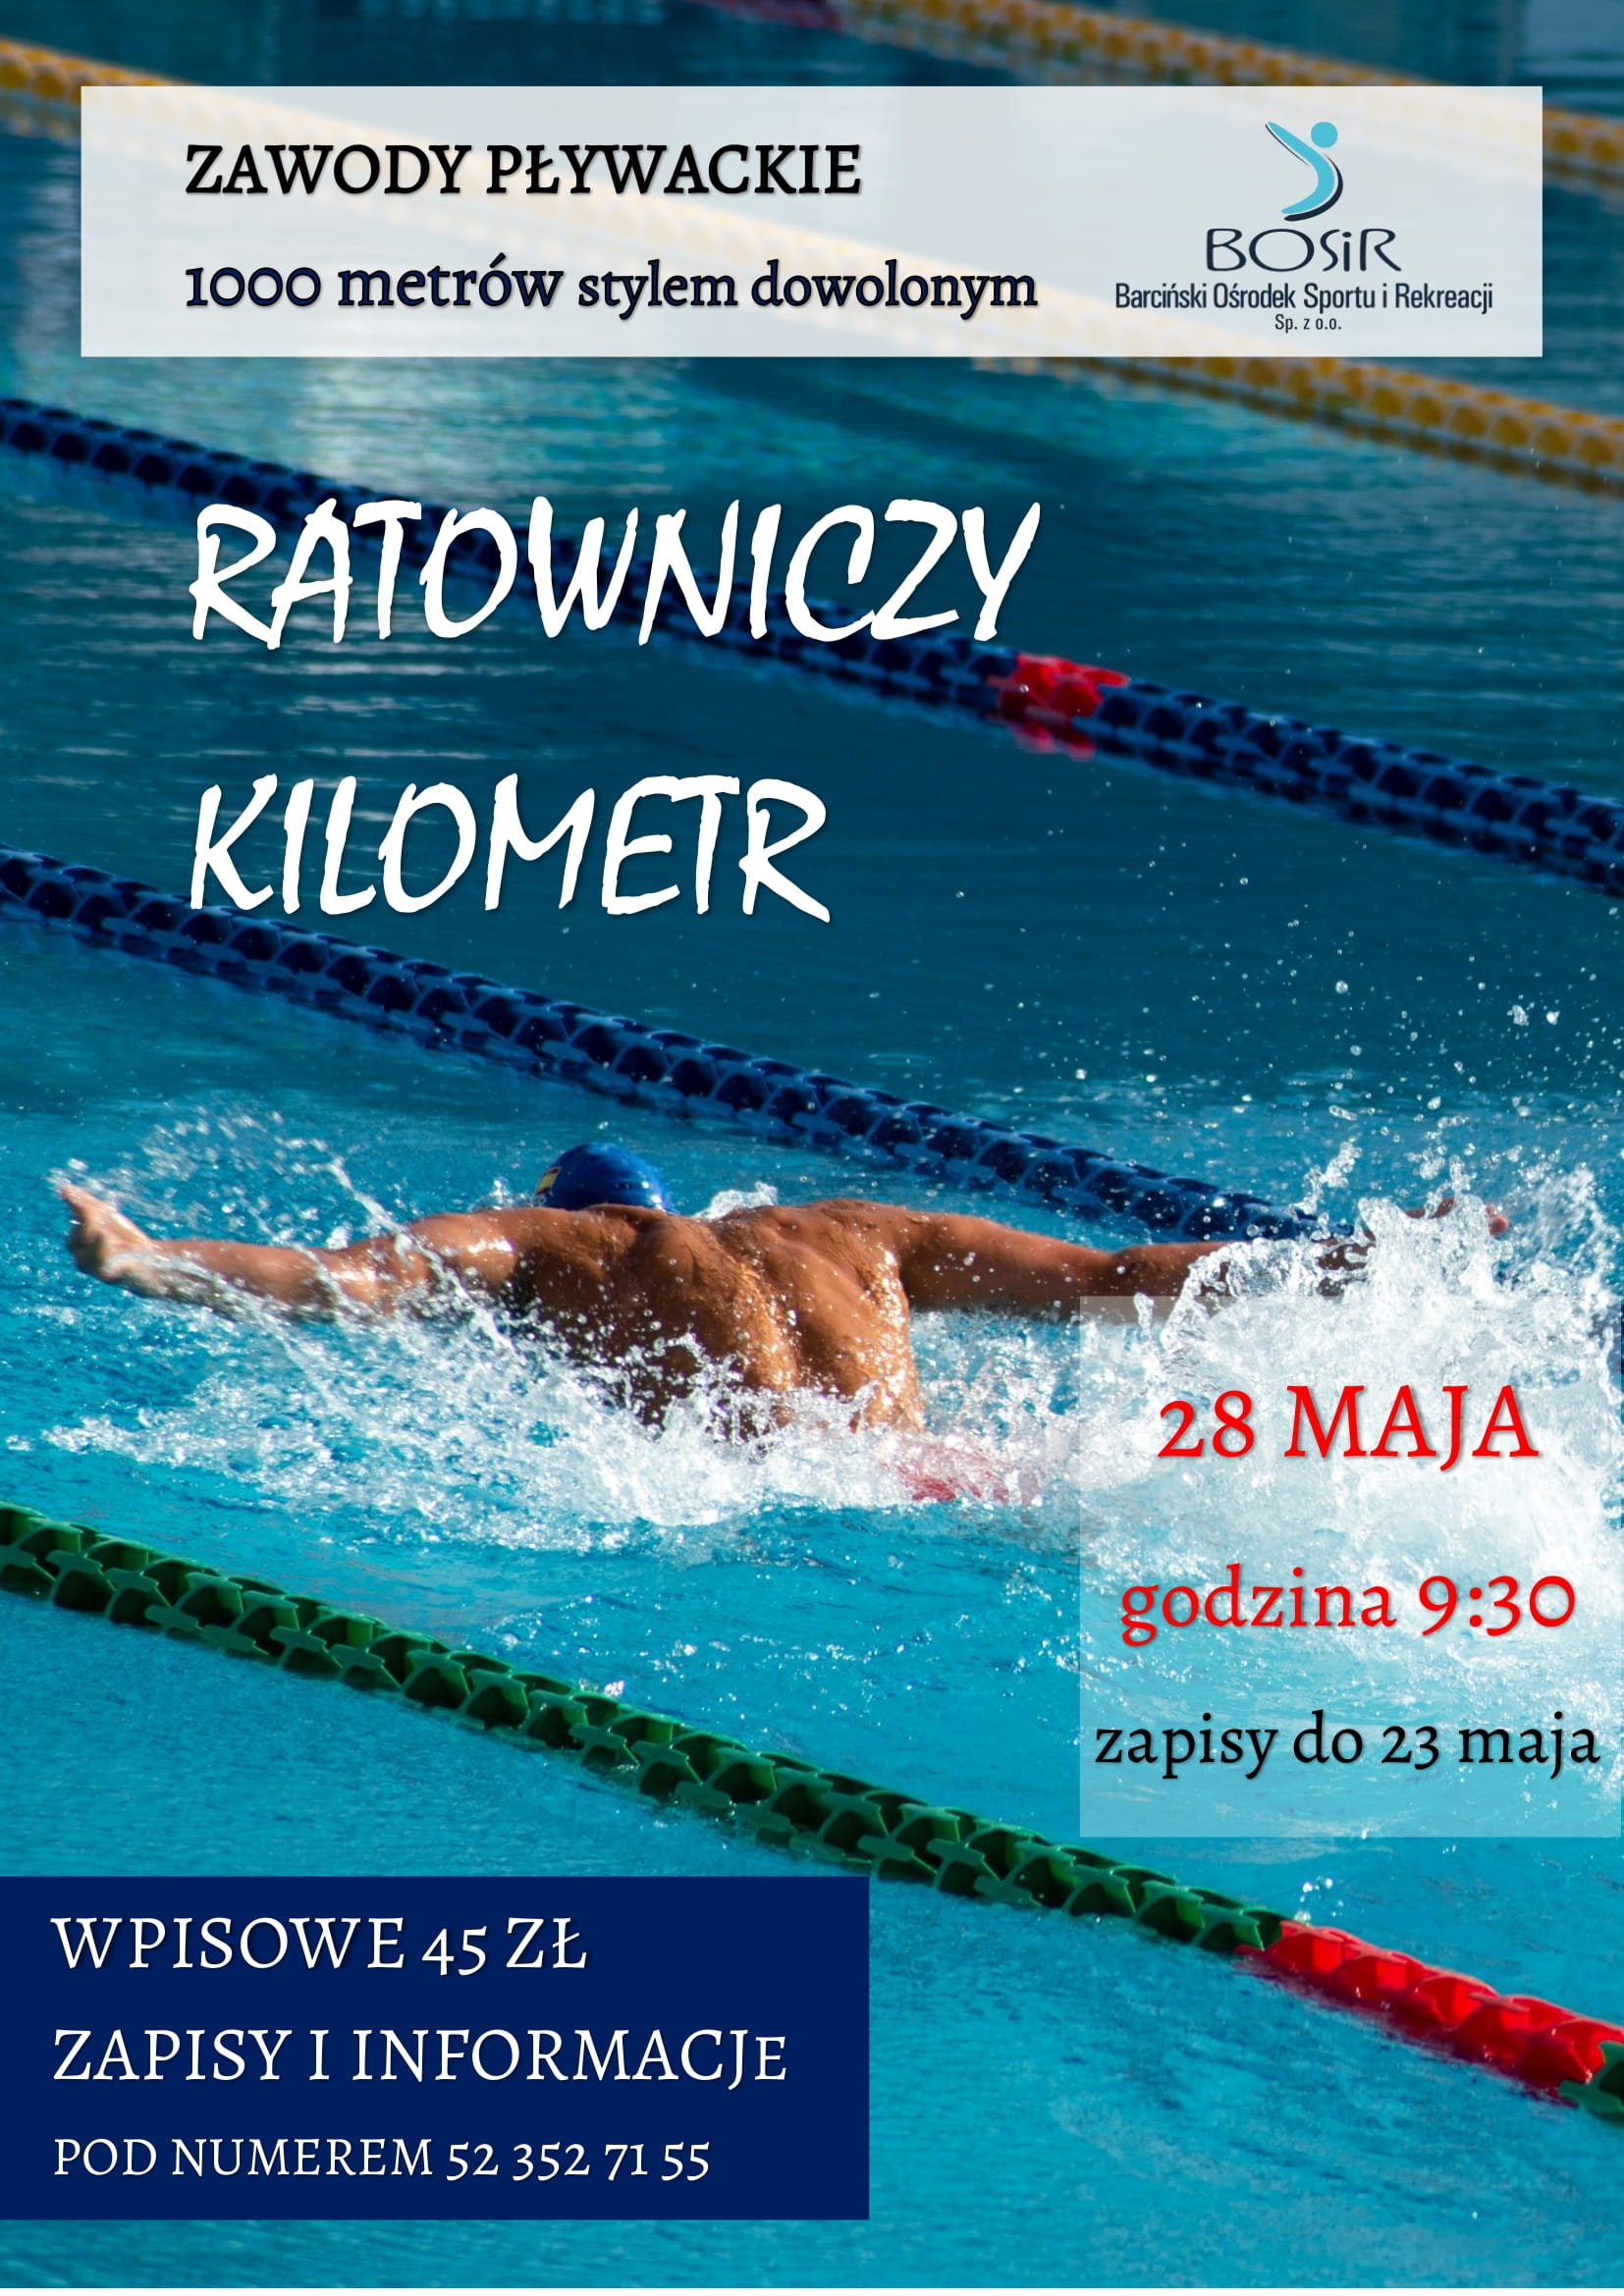 Read more about the article Ratowniczy kilometr